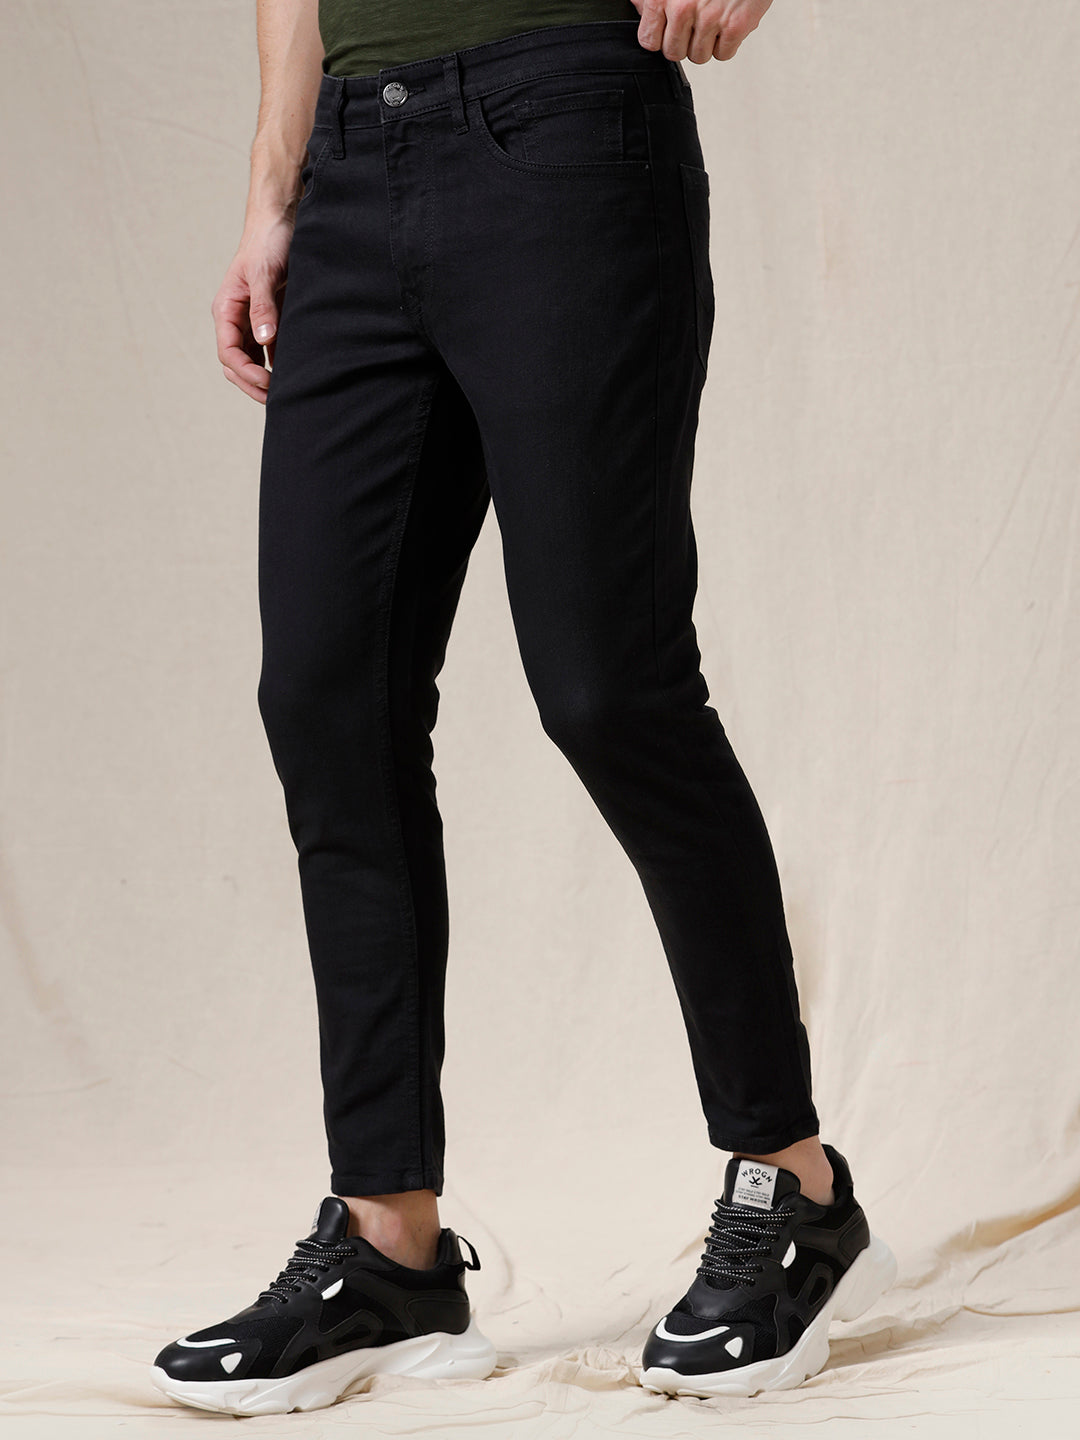 Solid Black Cropped Fit Jeans